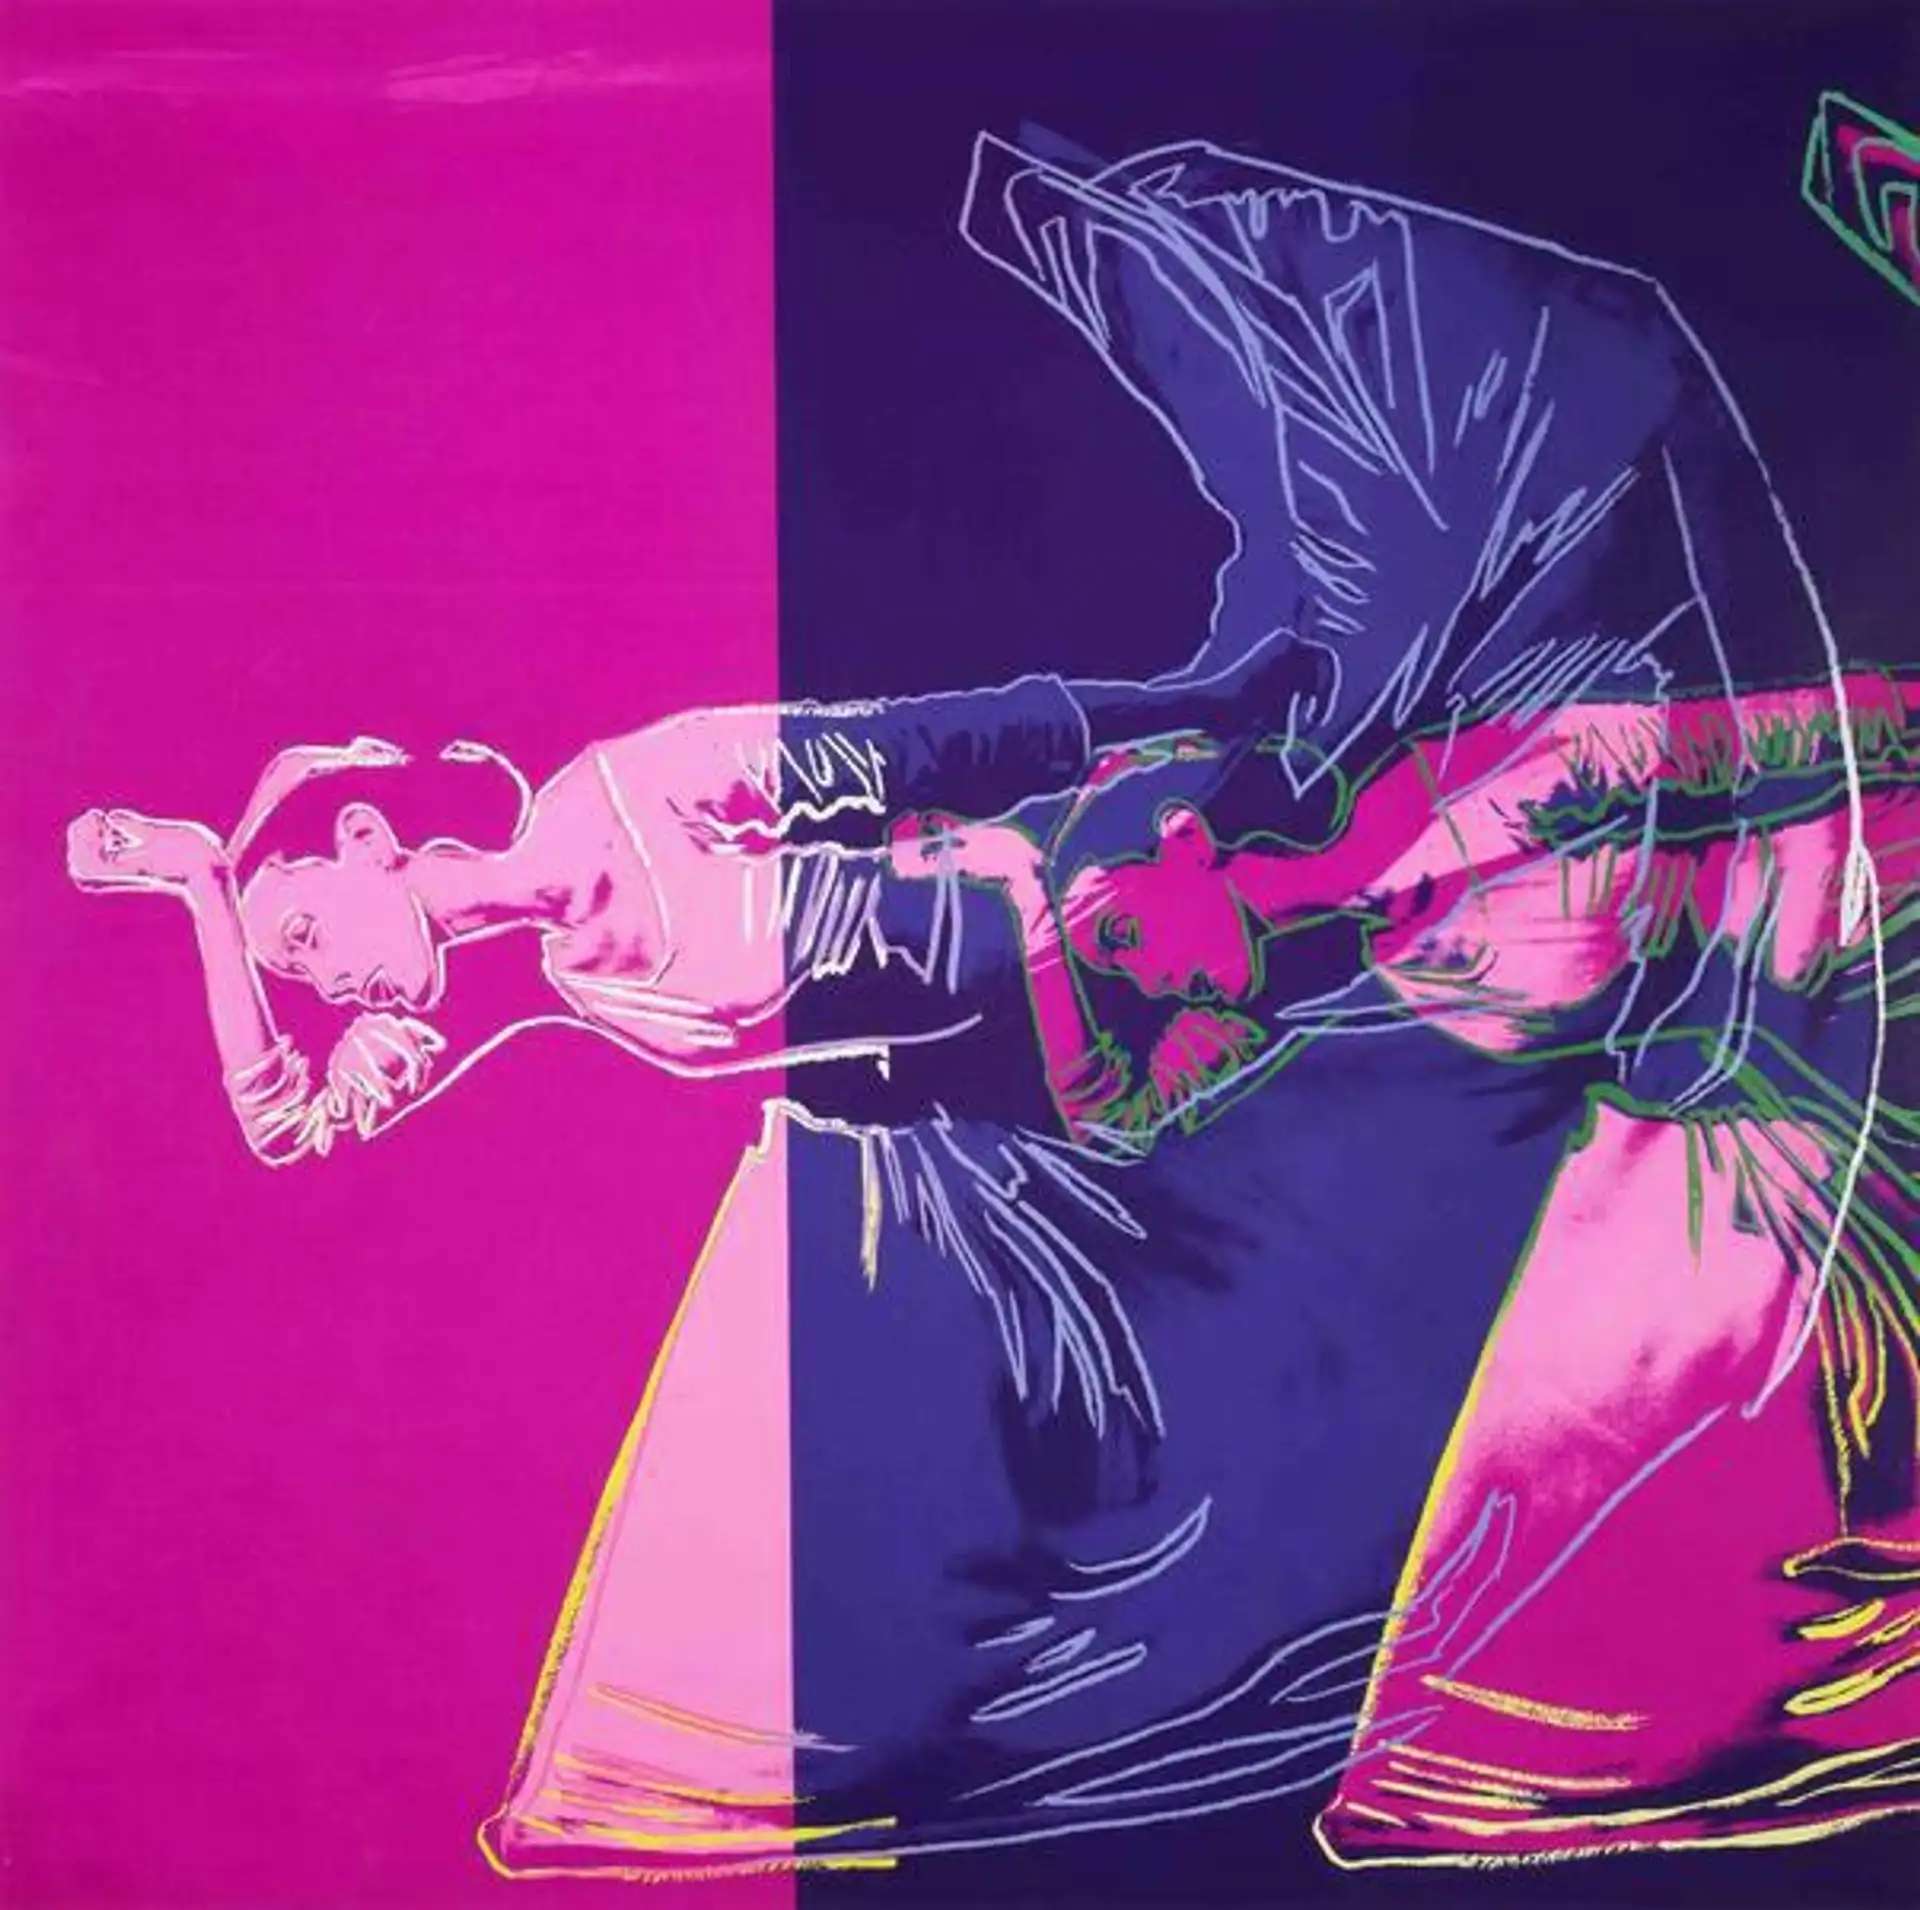 Letter To The World (The Kick) by Andy Warhol